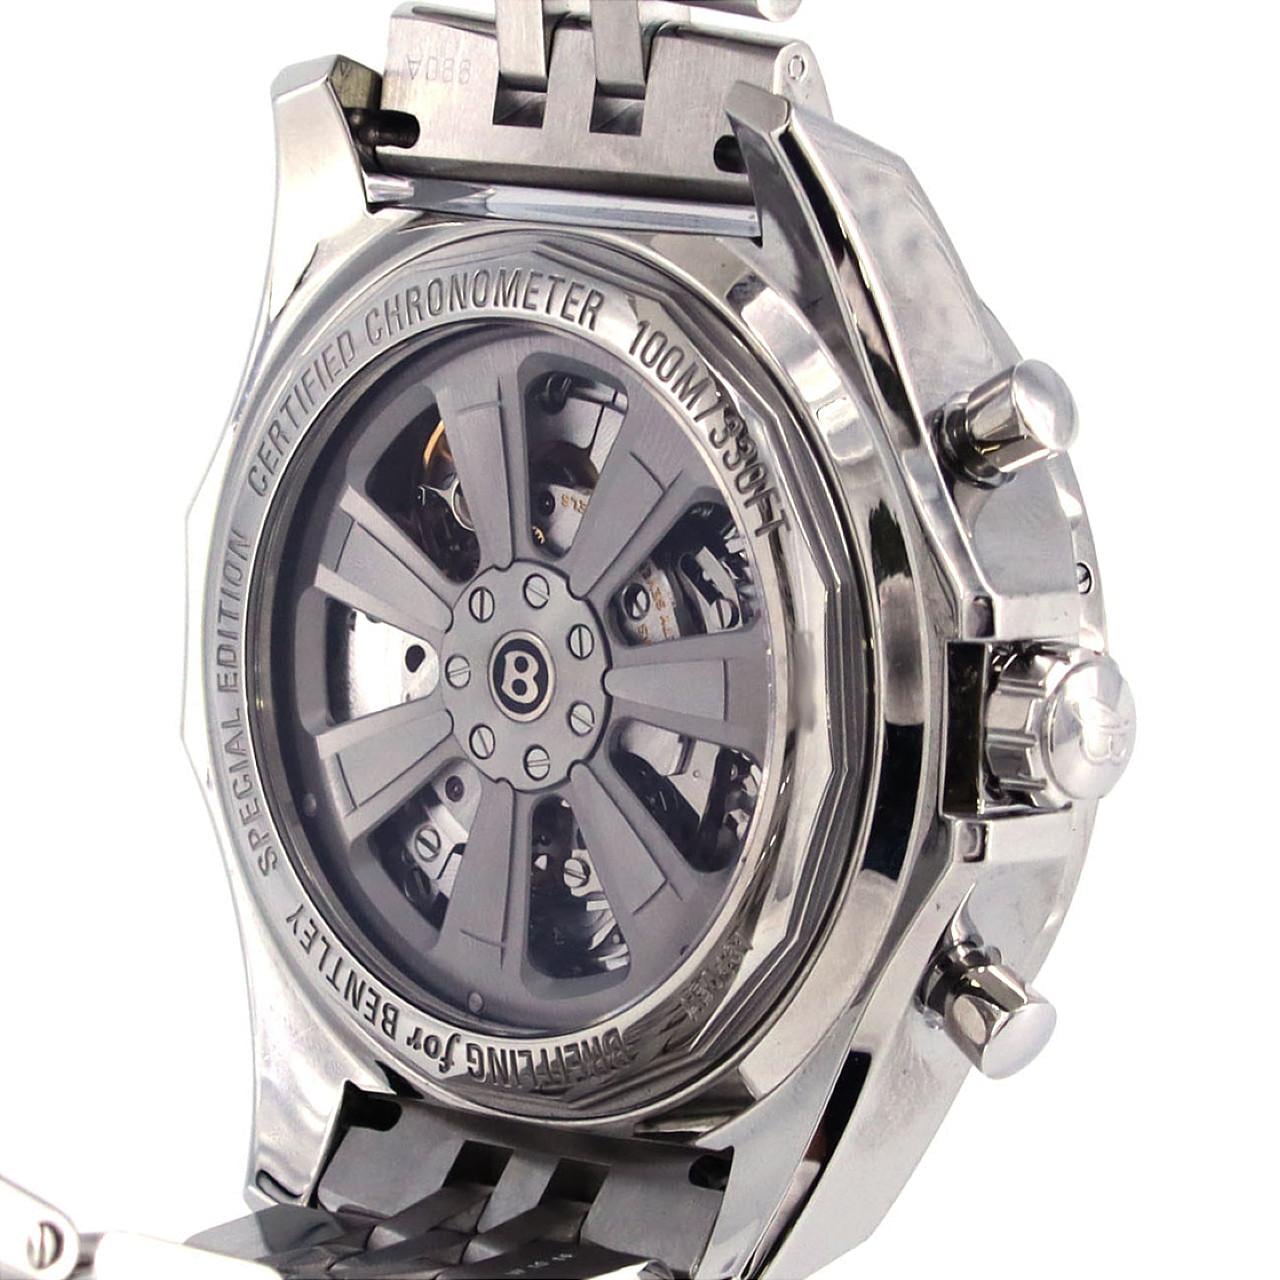 BREITLING Bentley B04 GMT AB0431 SS Automatic